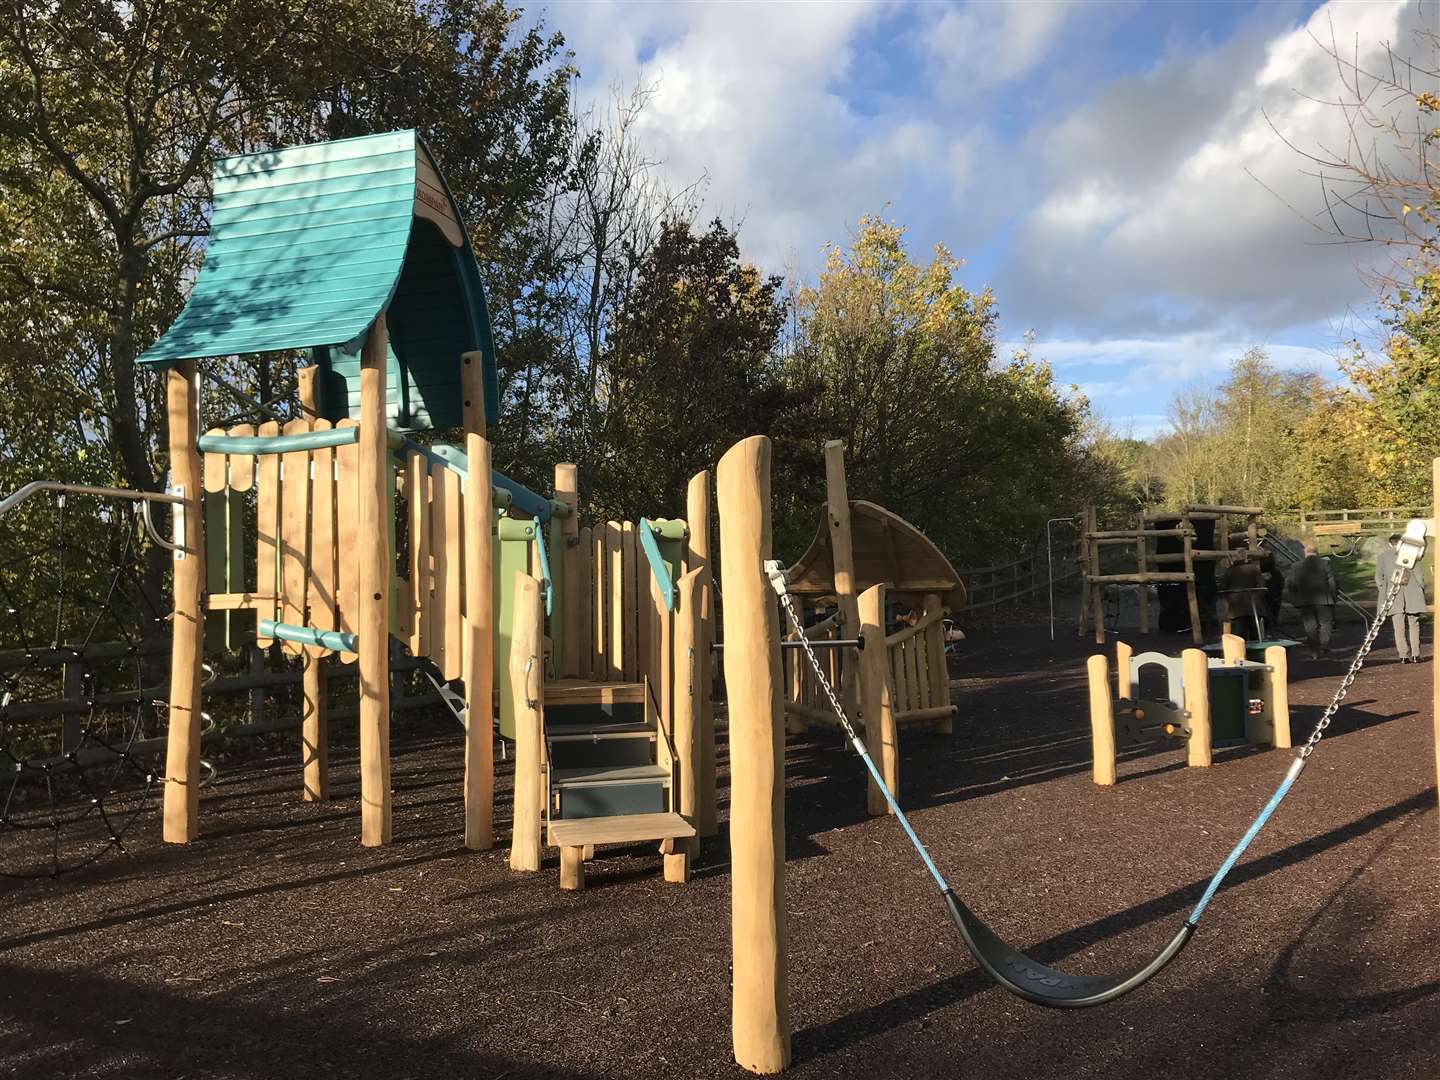 The new area which was unveiled at Darenth Country Park